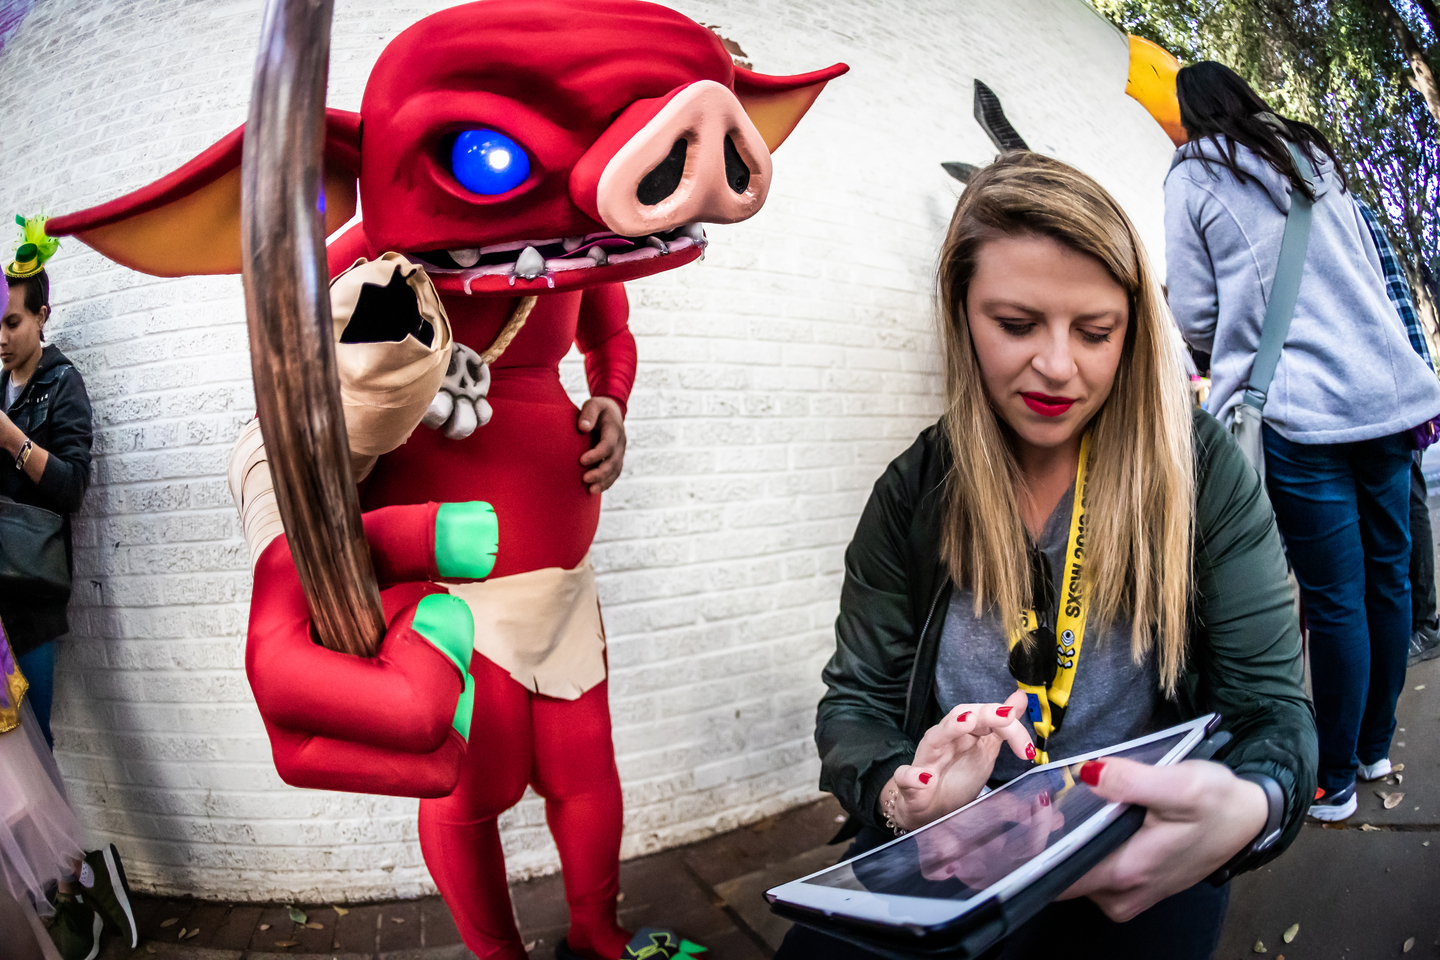 SXSW Gaming Cosplay Contest presented by Alienware – Photo by Aaron Rogosin